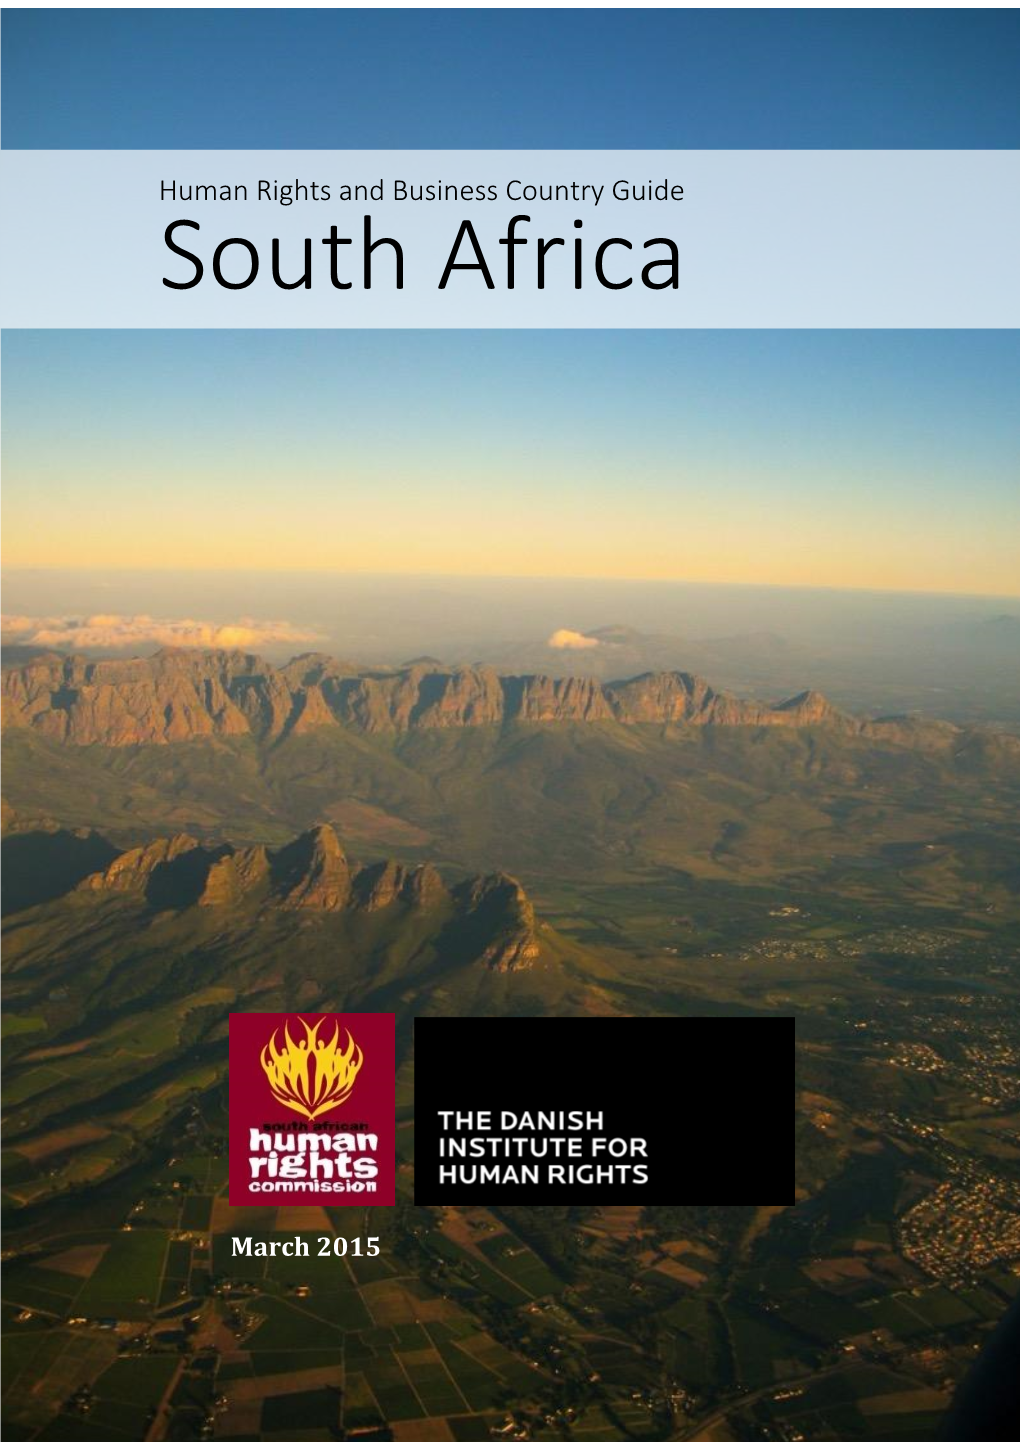 Human Rights and Business Country Guide: South Africa